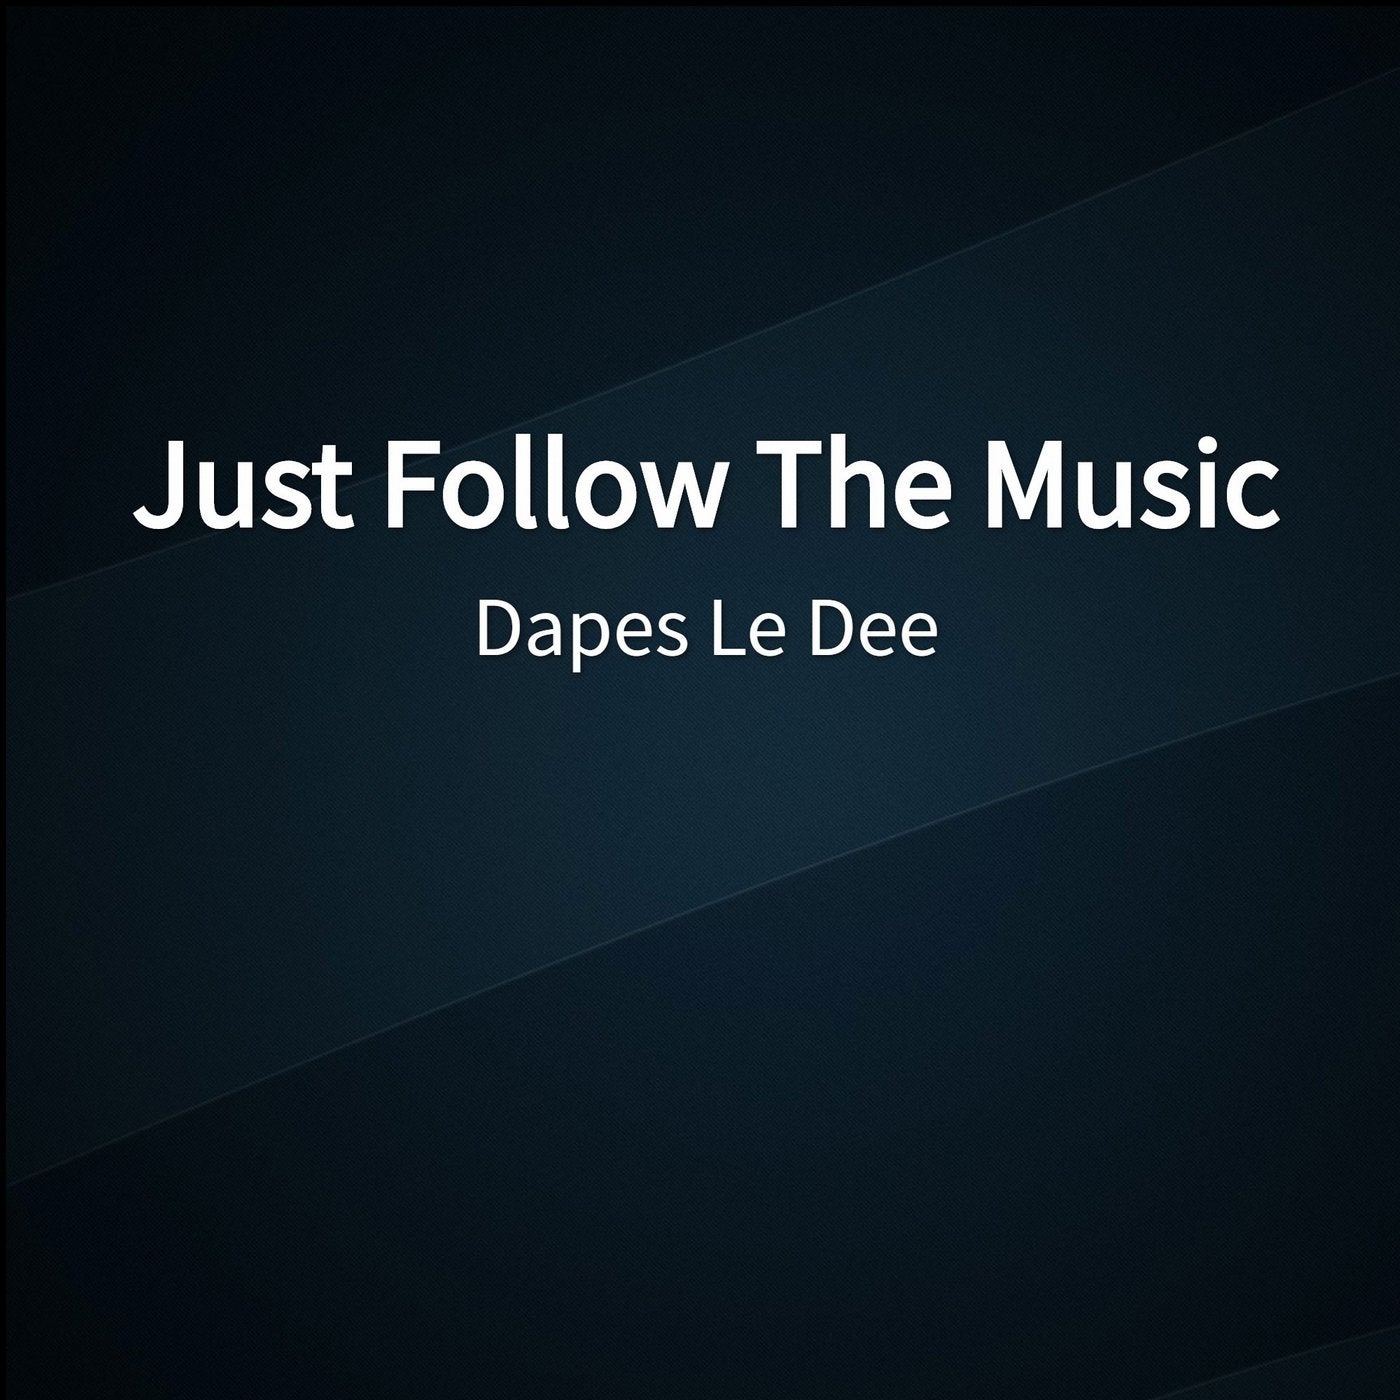 Just Follow The Music